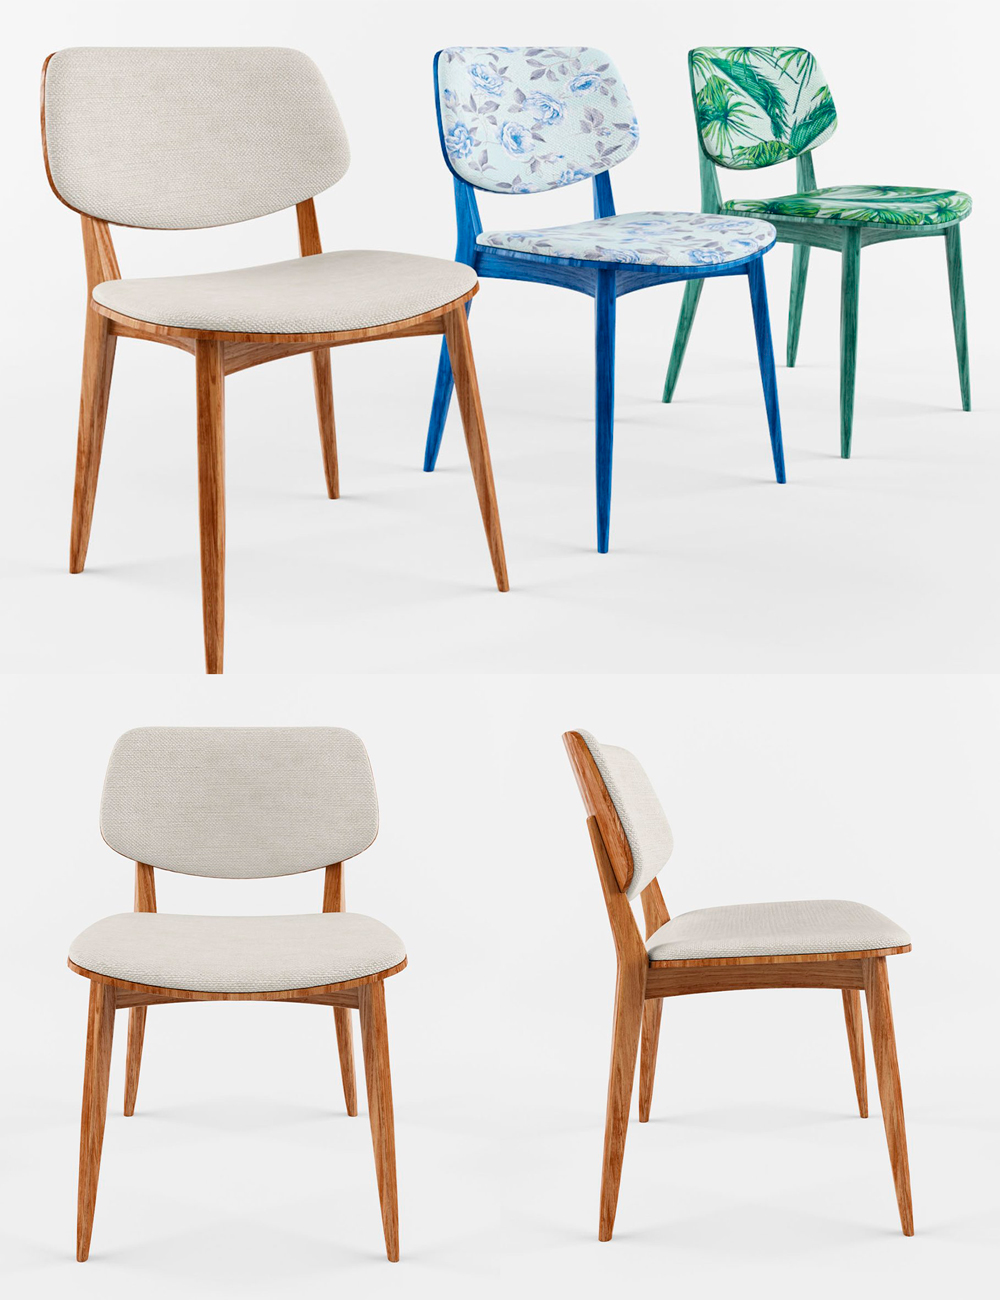 Rendering of a unique 3d model of chairs in various colors